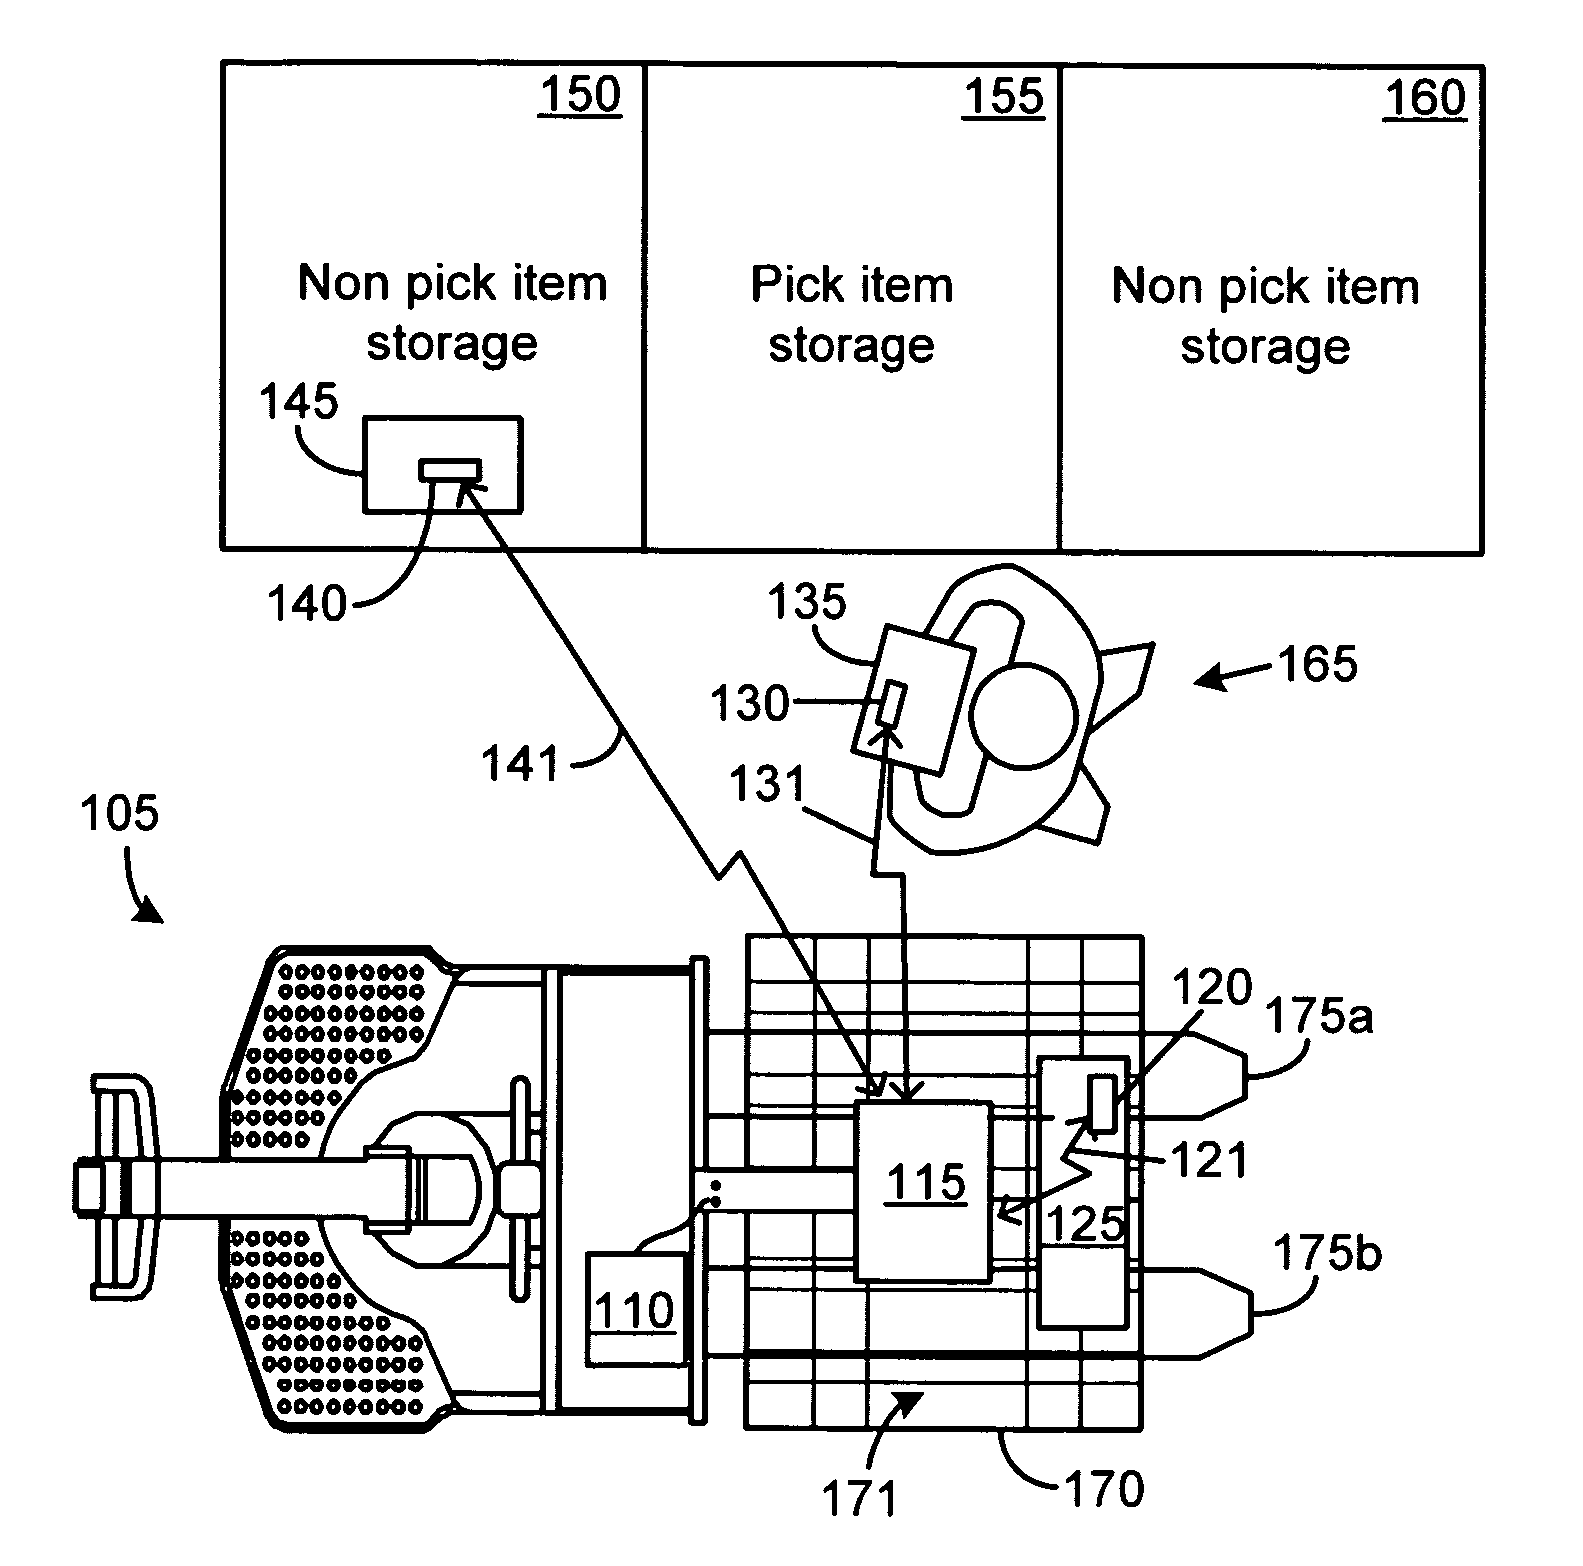 Systems and methods for order-picking